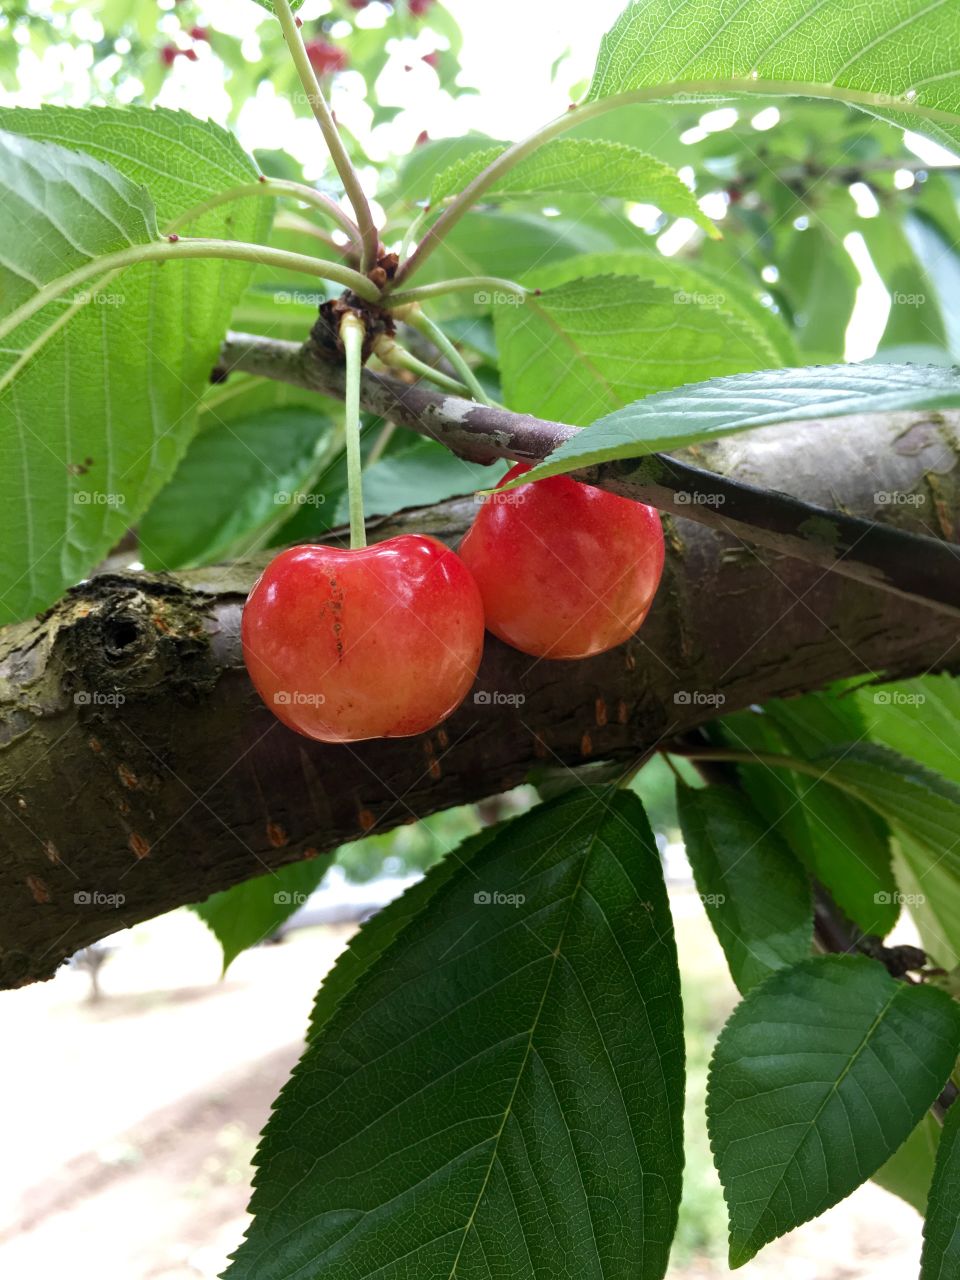 Fruit of the Branch